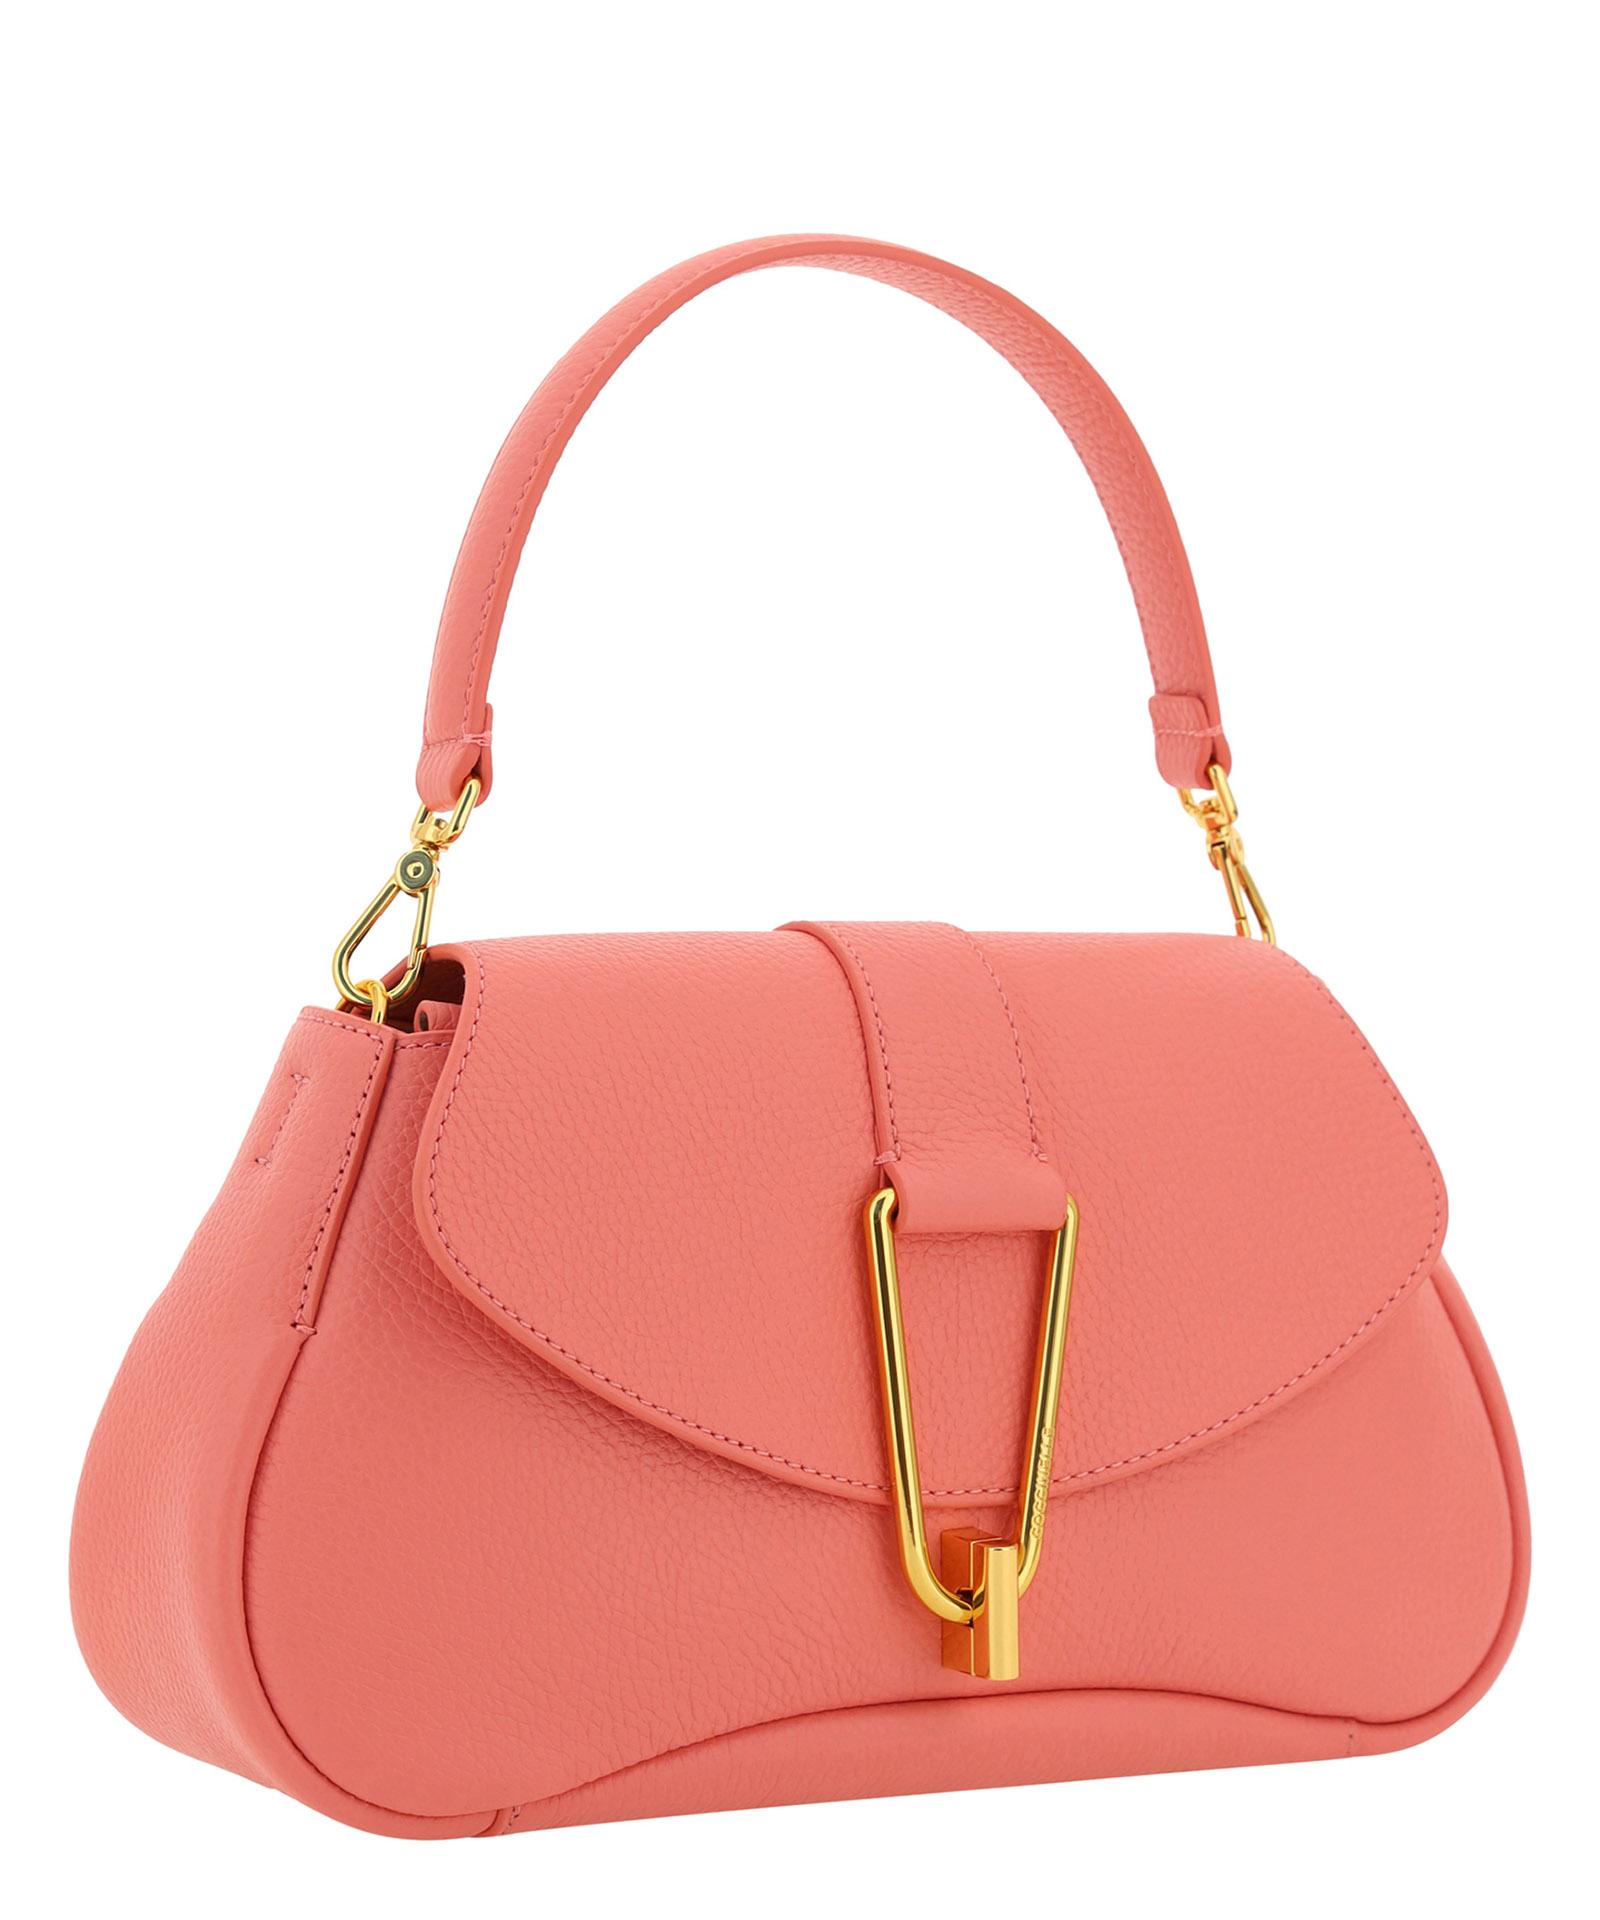 Coccinelle Himma Handbag in Pink | Lyst